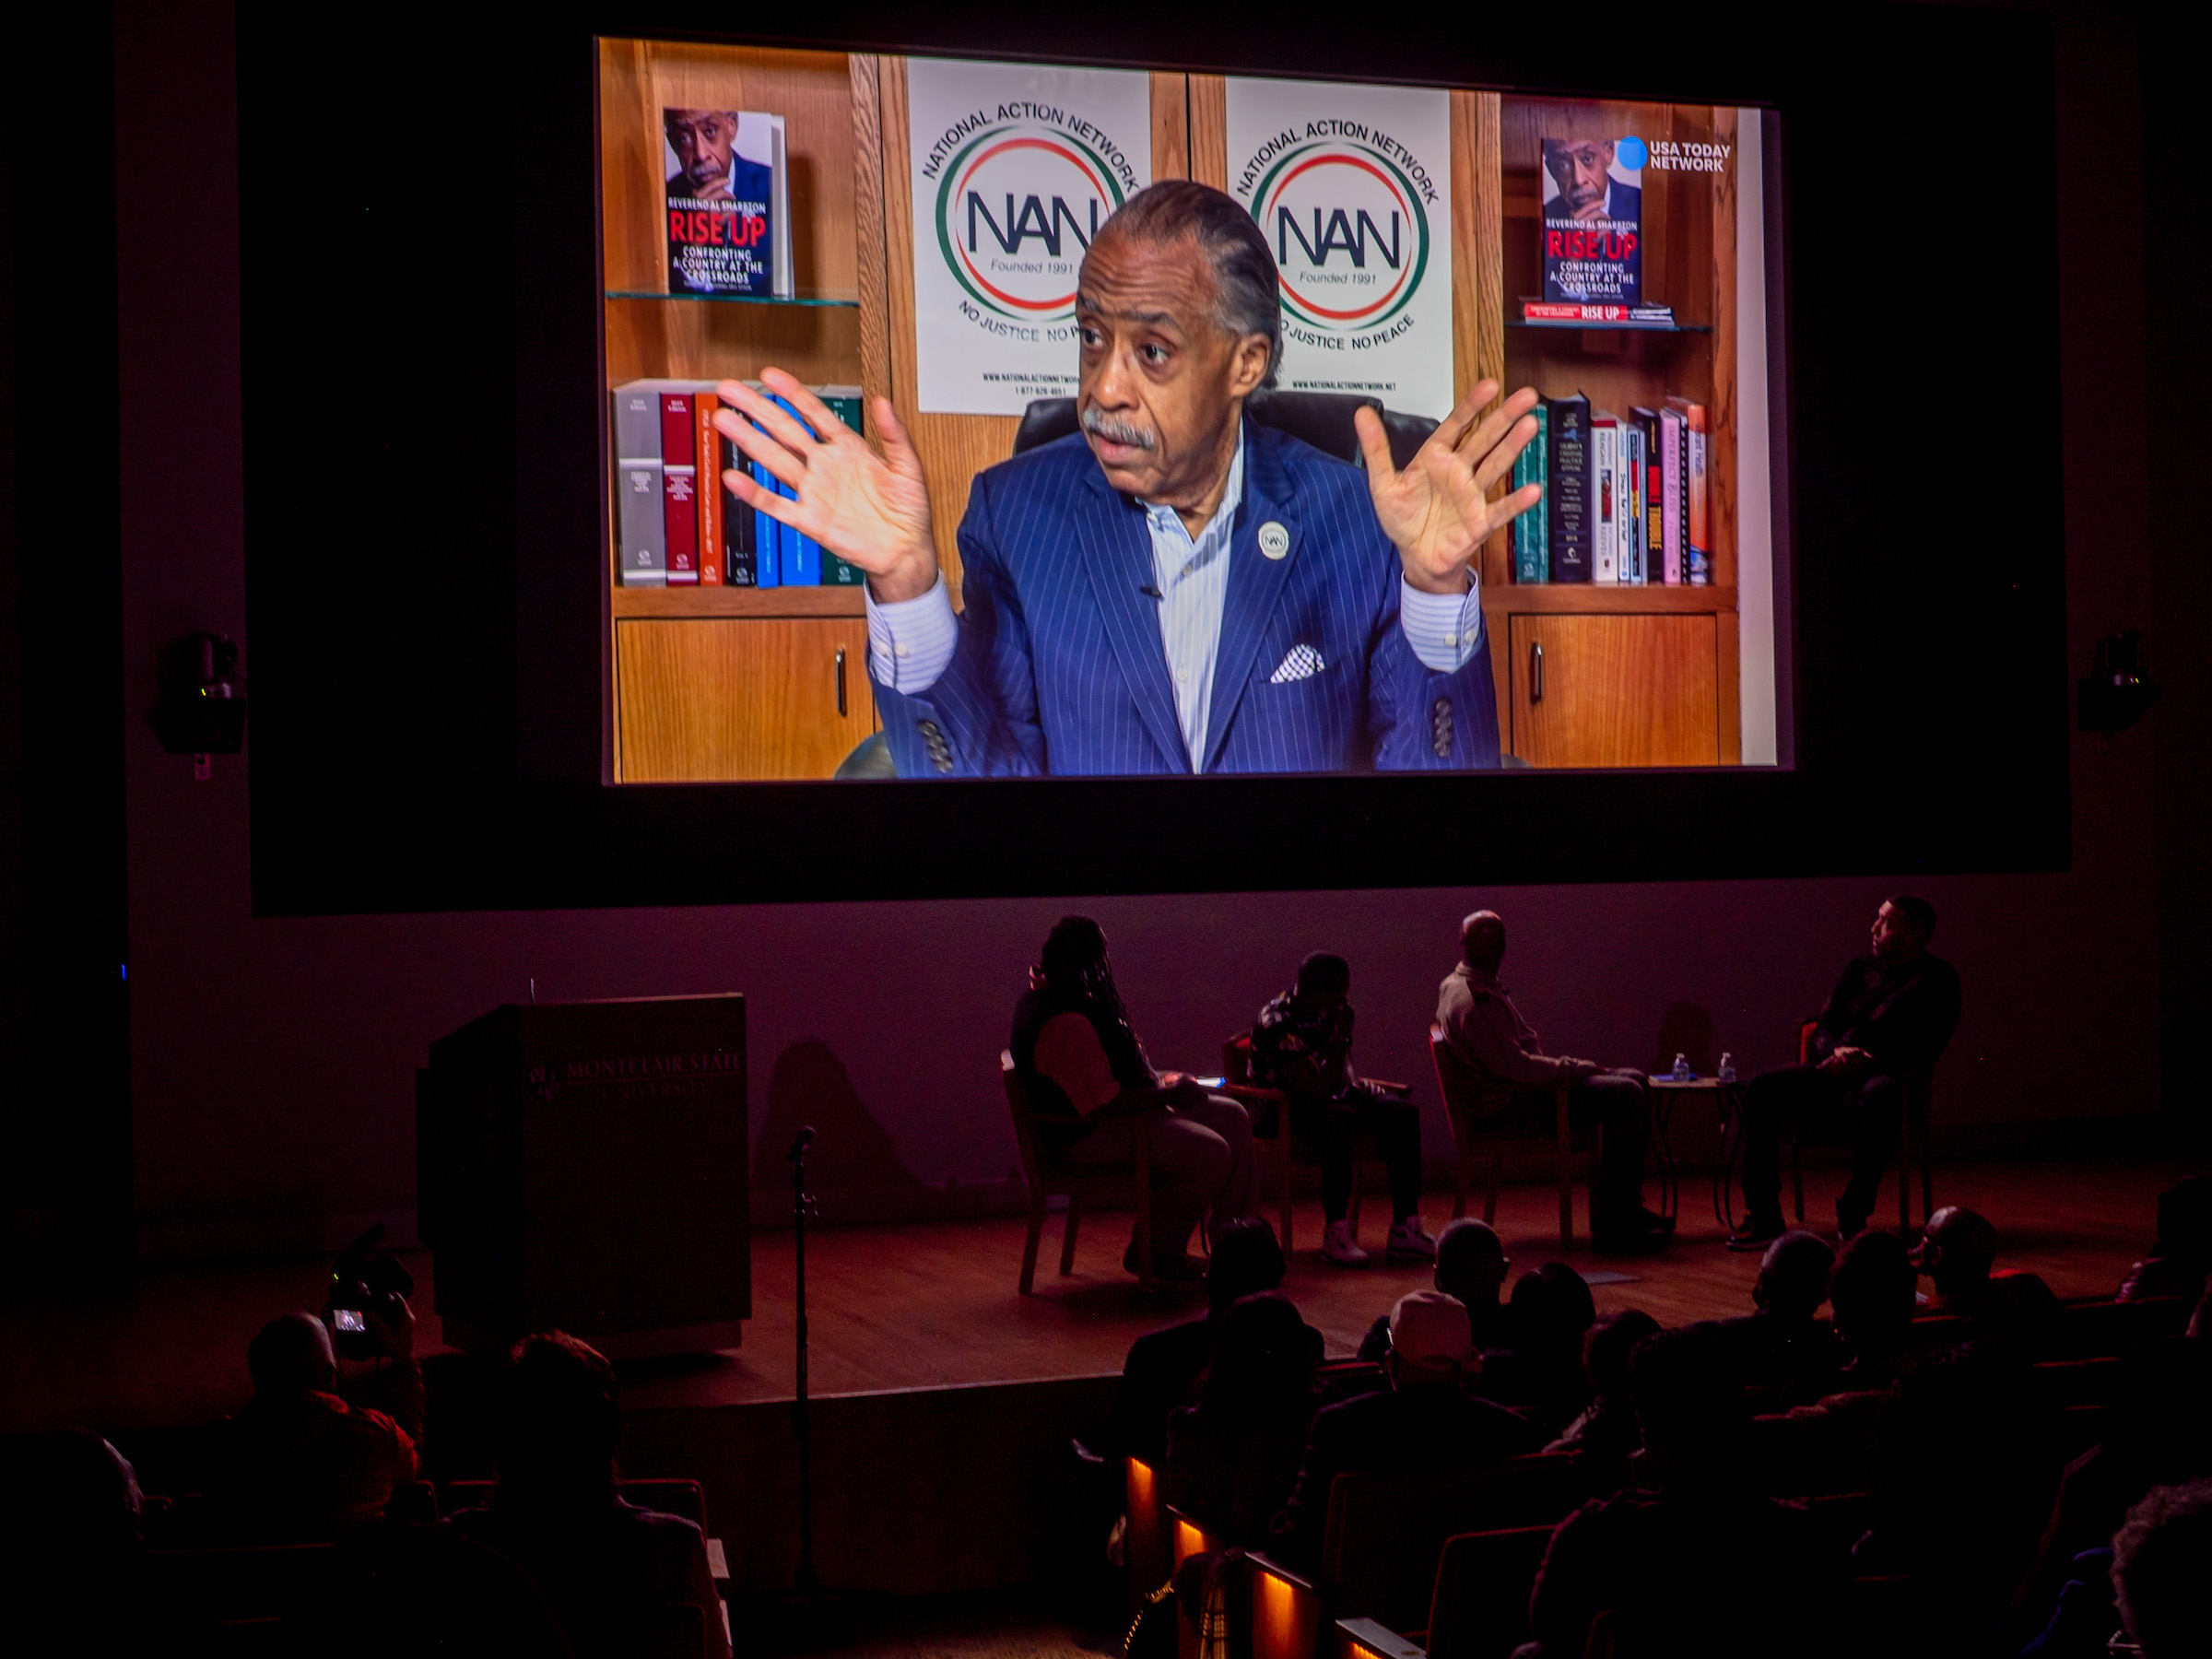 The event included scenes from a documentary in production on the Jersey Four. The Rev. Al Sharpton helped lobby for justice for the Jersey Four, who were represented by Johnnie Cochran.